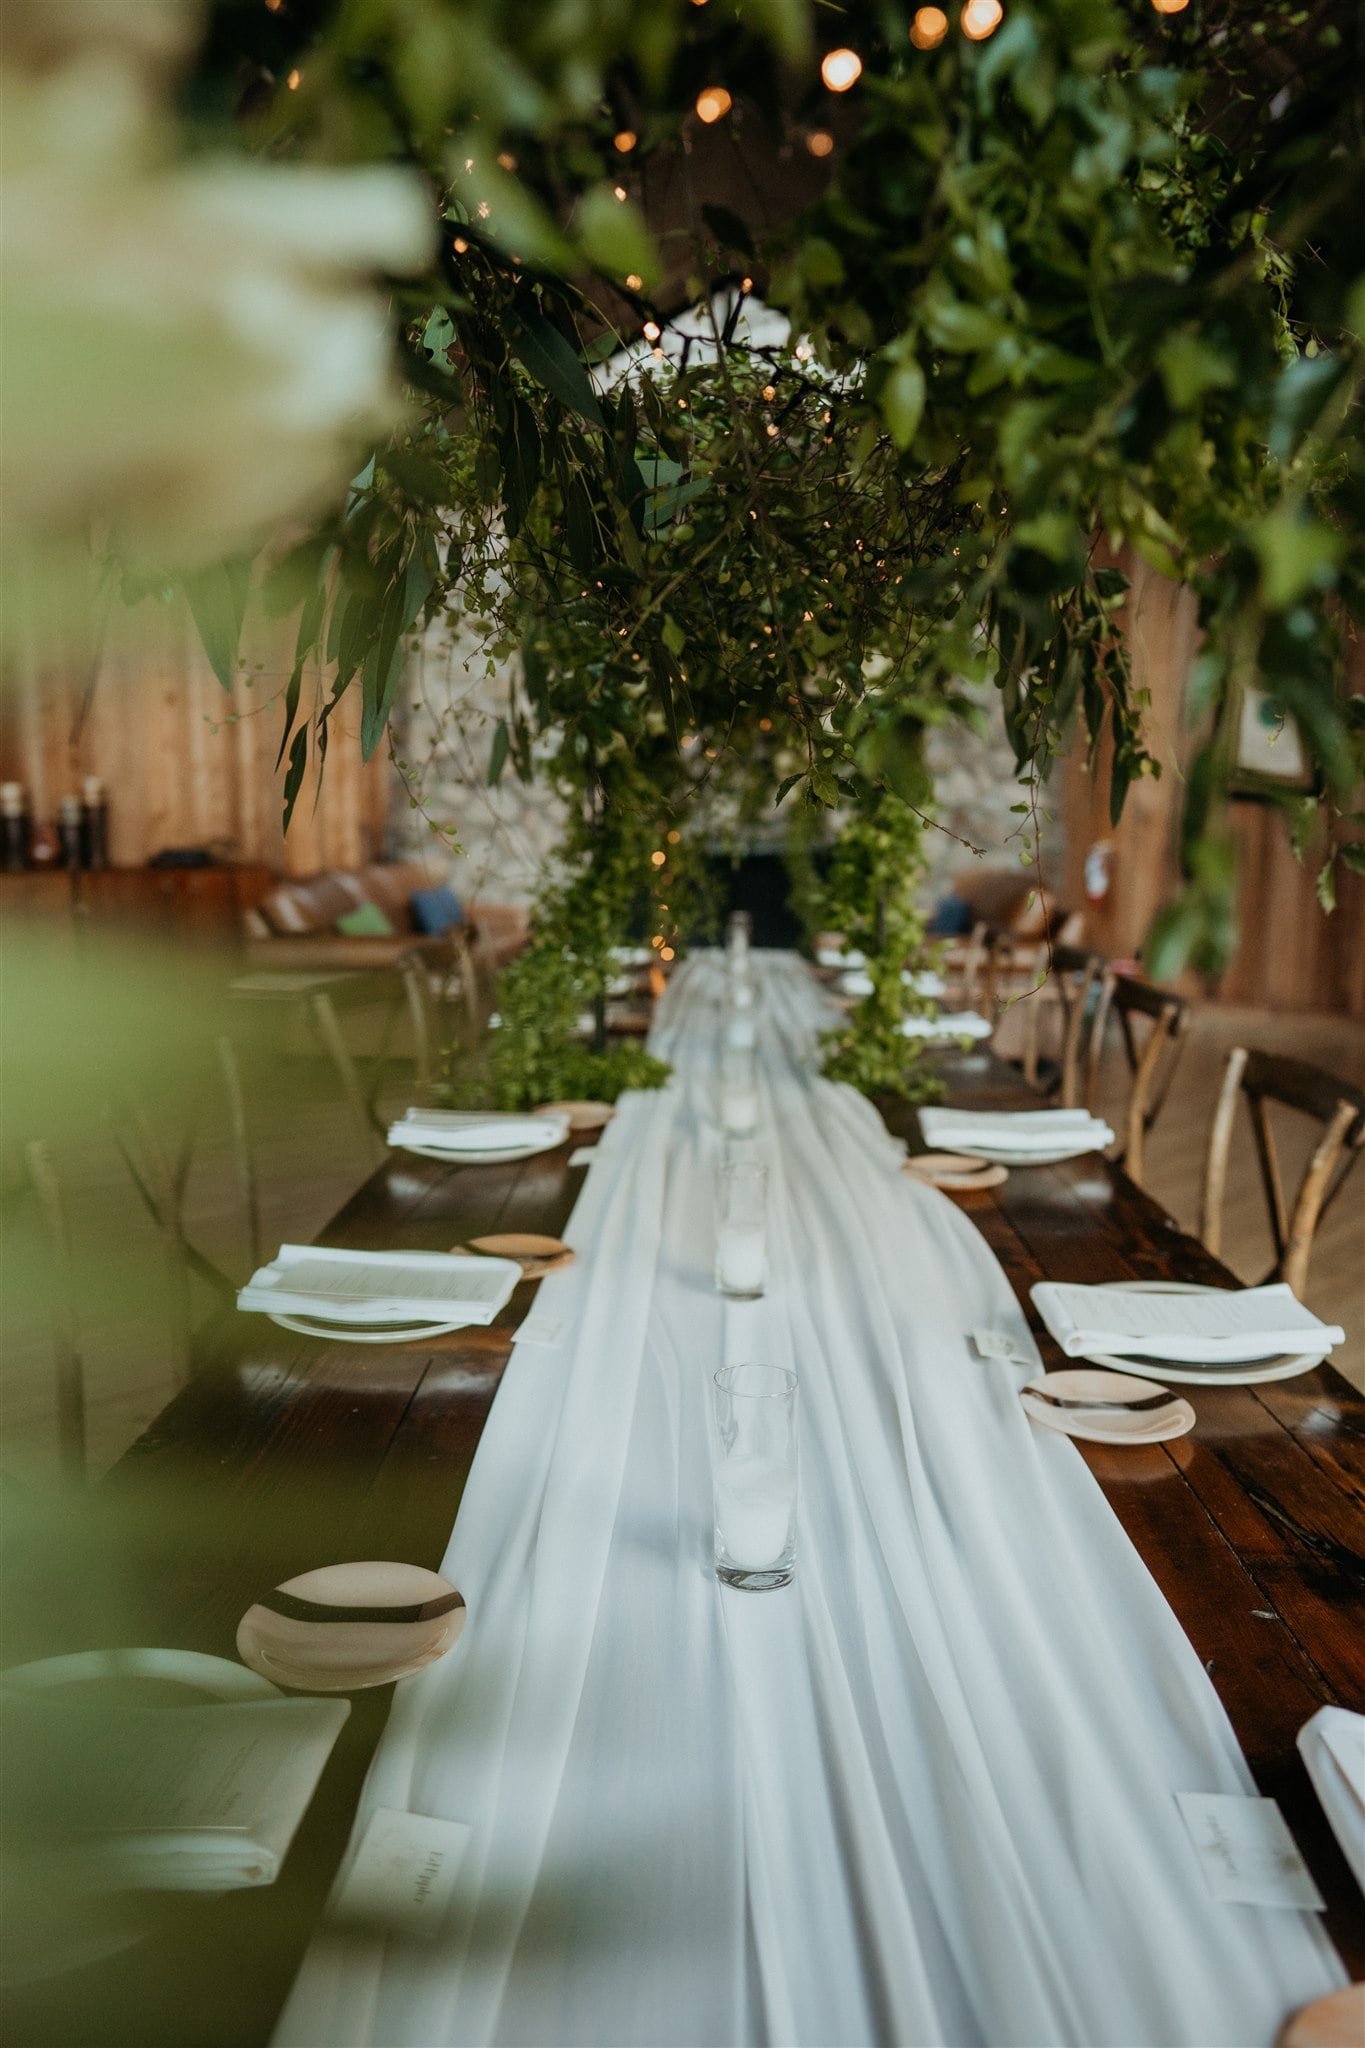 Winter wedding reception table with greenery arch and white table runner